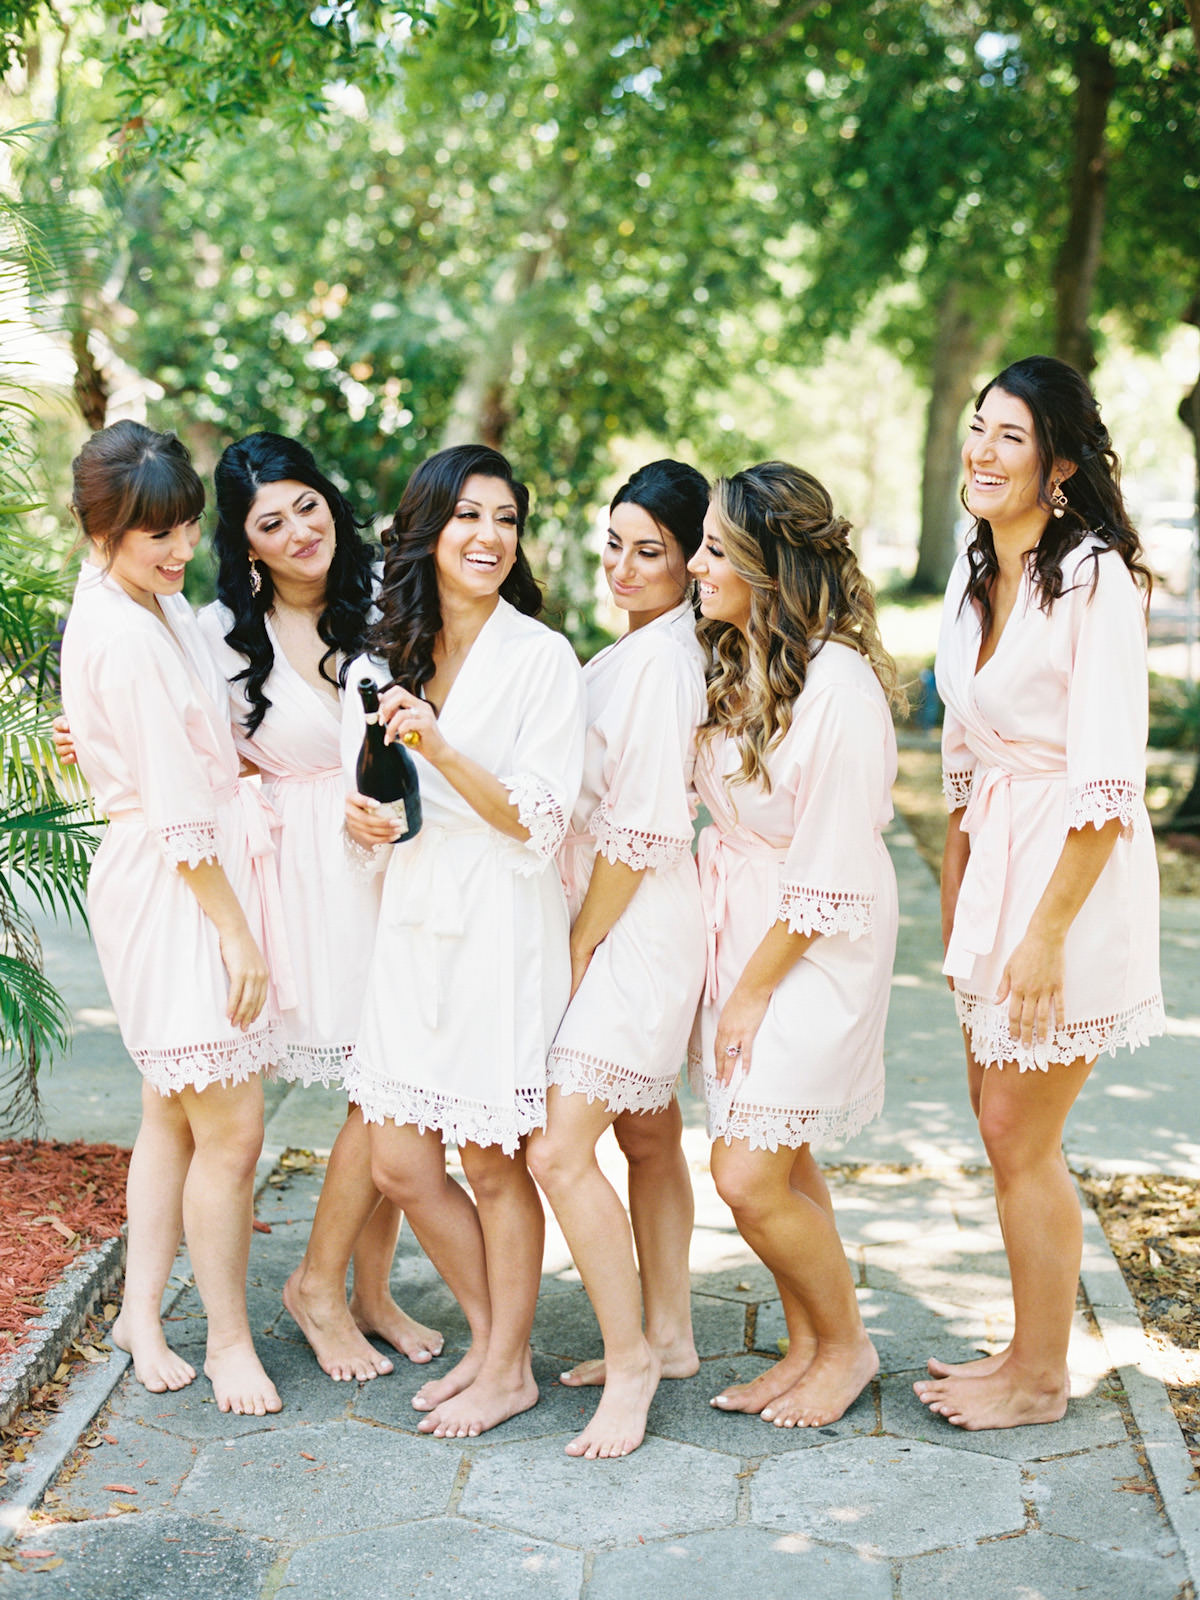 Bride and Bridesmaids Getting Ready and Popping Champagne in Blush Pink Robes